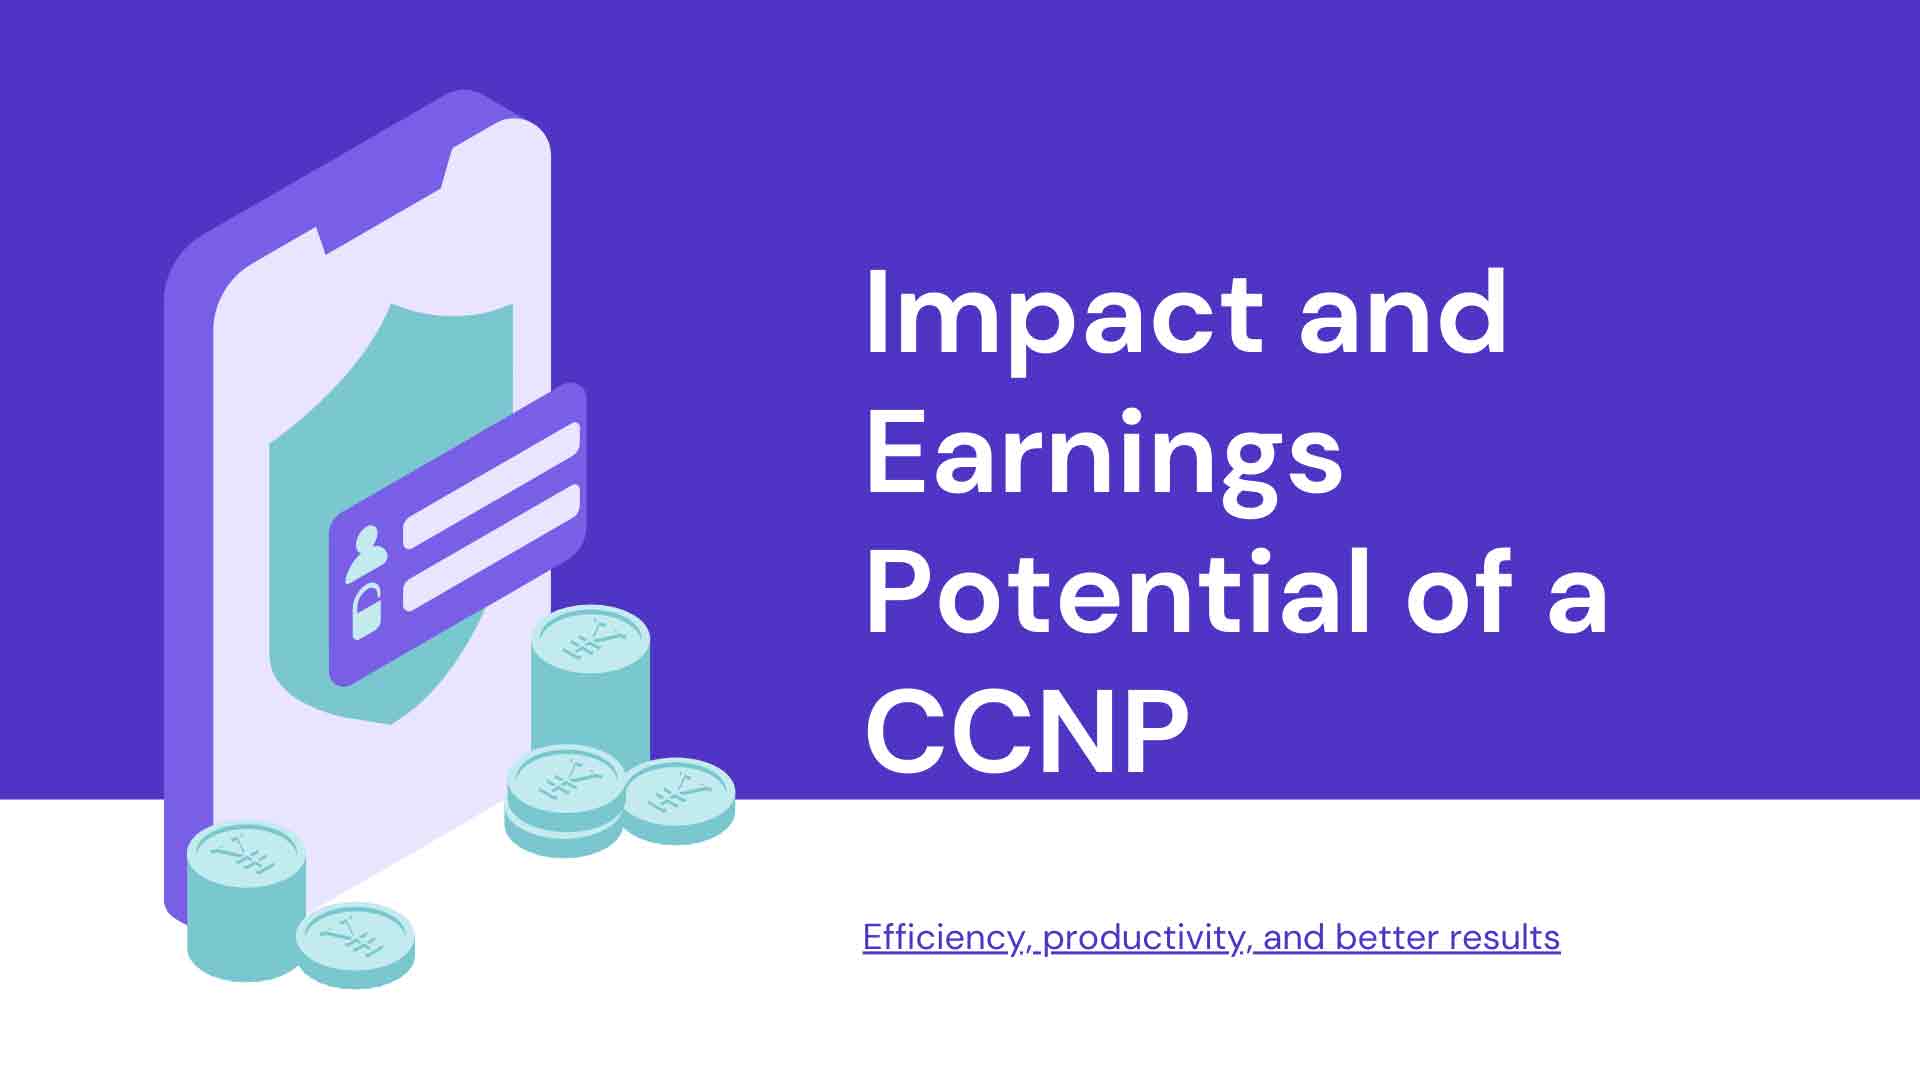 Impact and Earnings Potential of a CCNP Certification